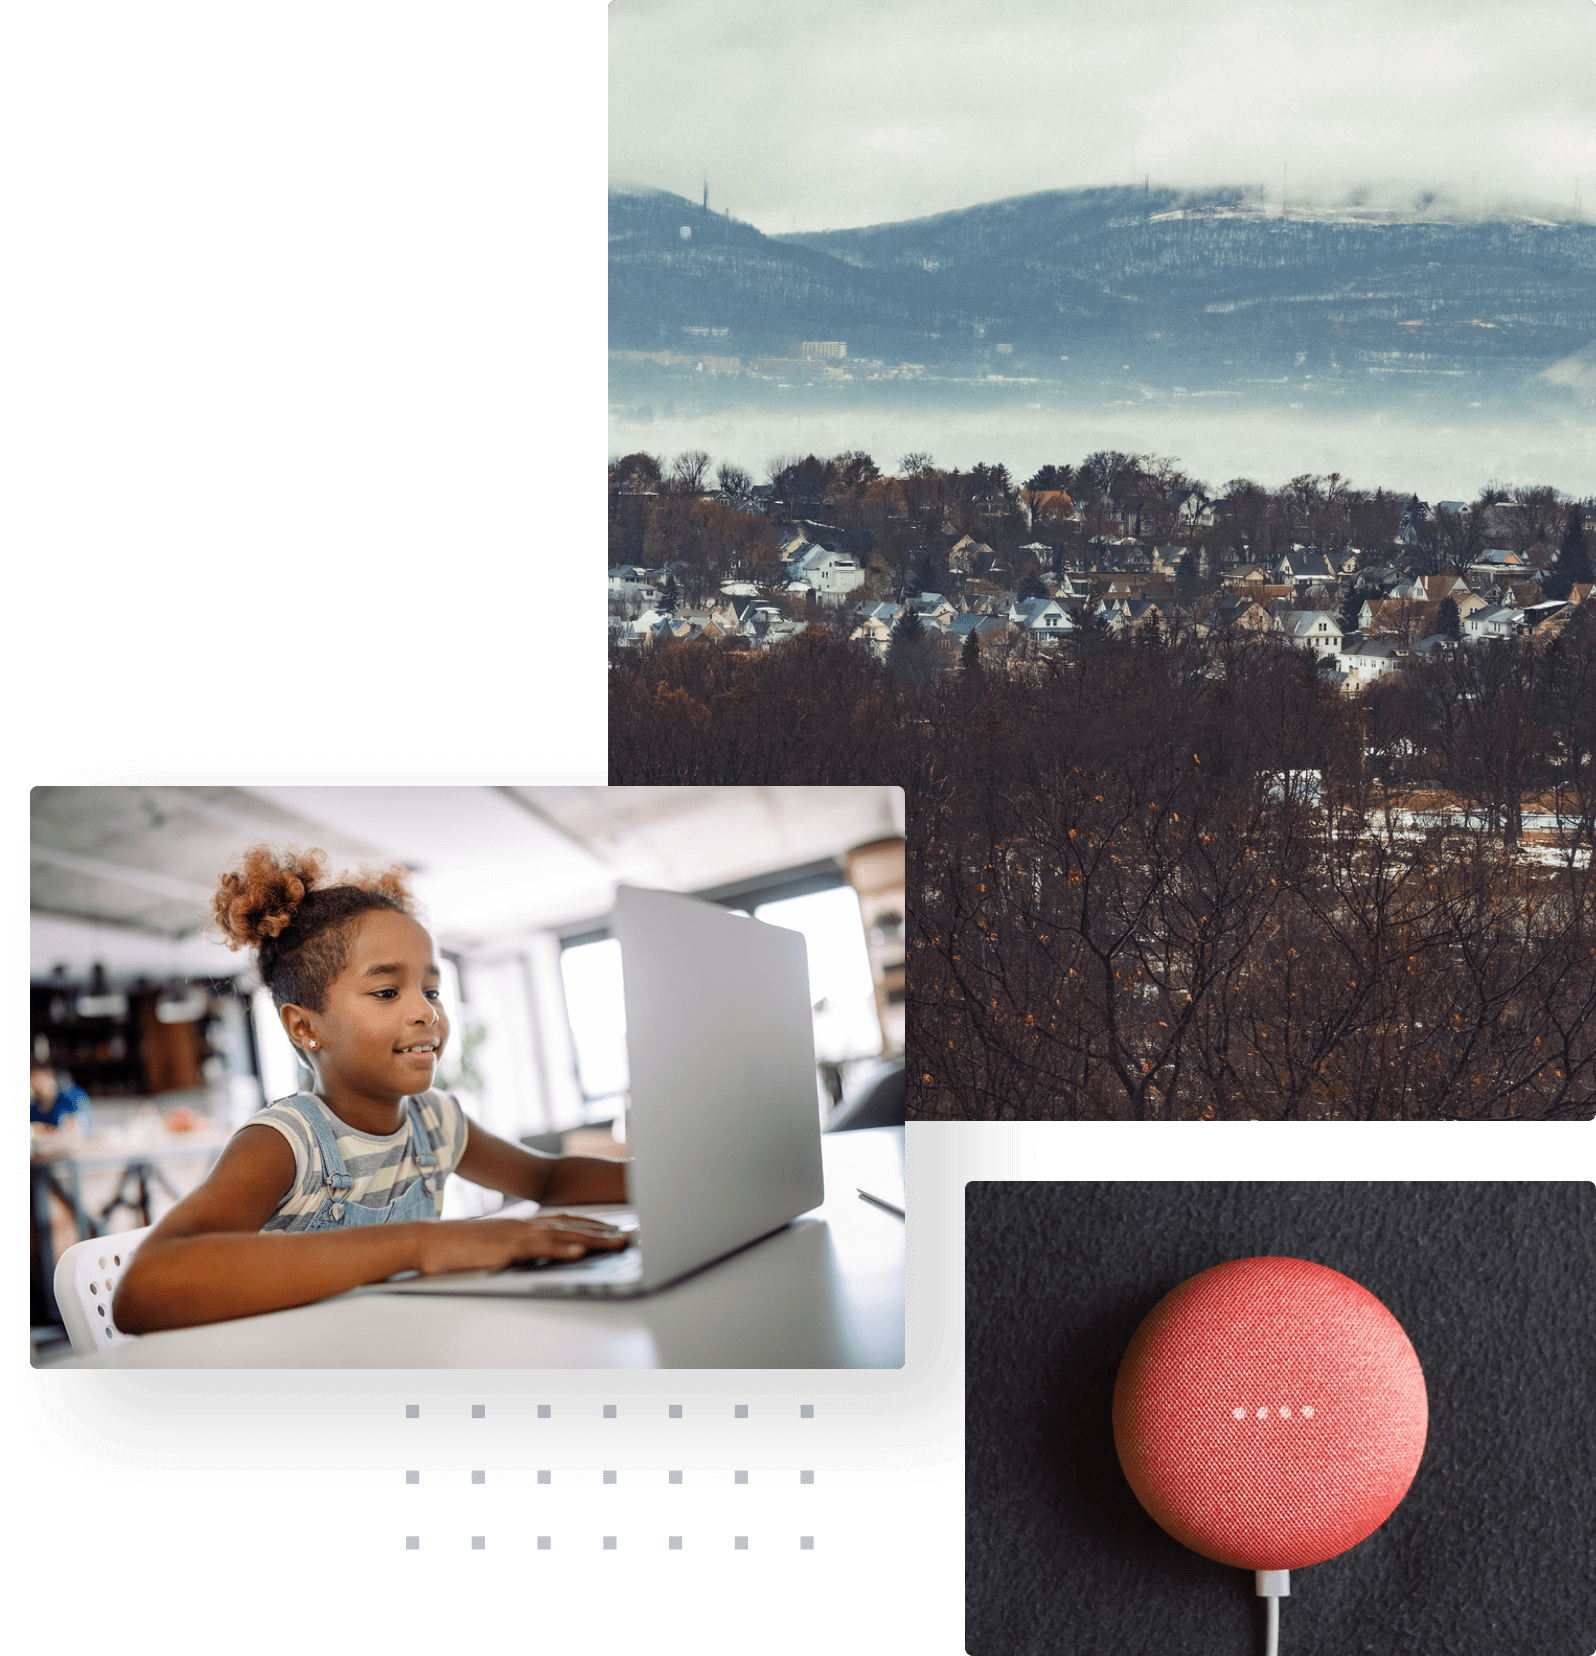 Collage photo of Palmerton, young girls using laptop at school, and a Amazon Alexa